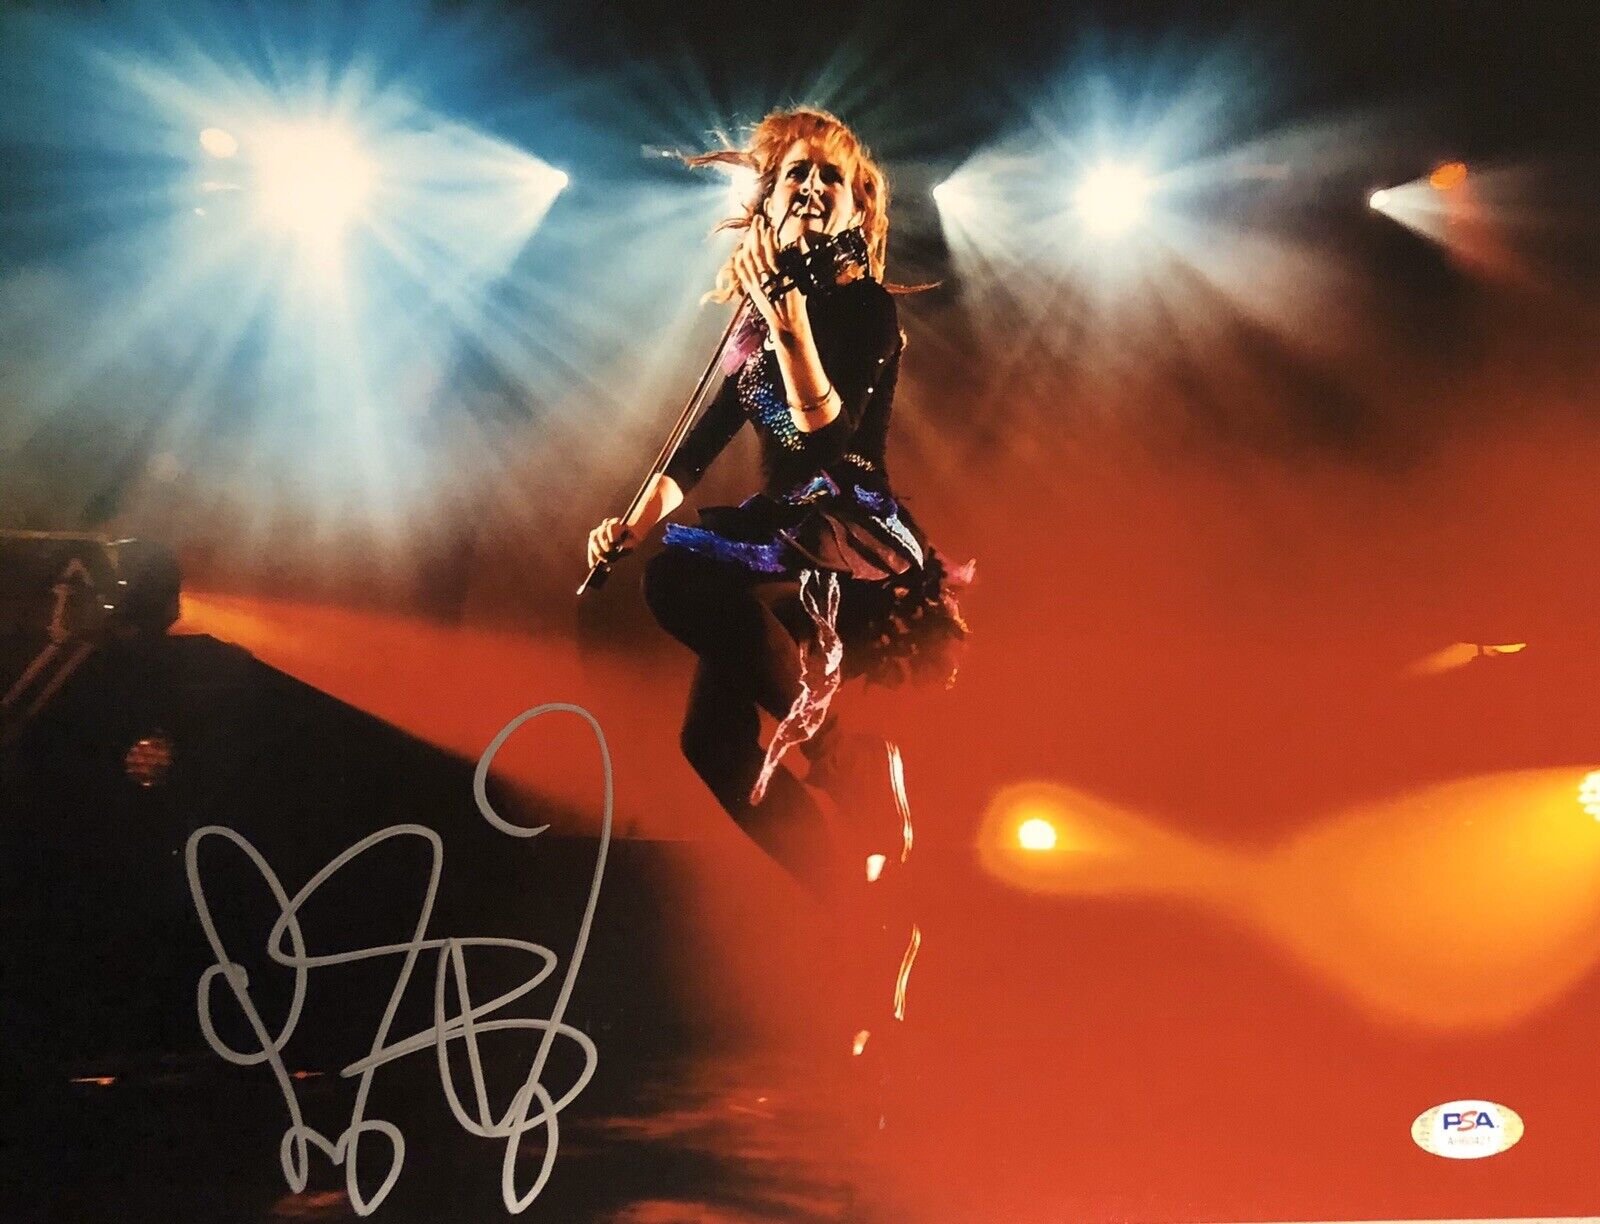 Lindsey Stirling Signed Autographed 11x14 Photo Poster painting Violin Player Grammy Psa/Dna